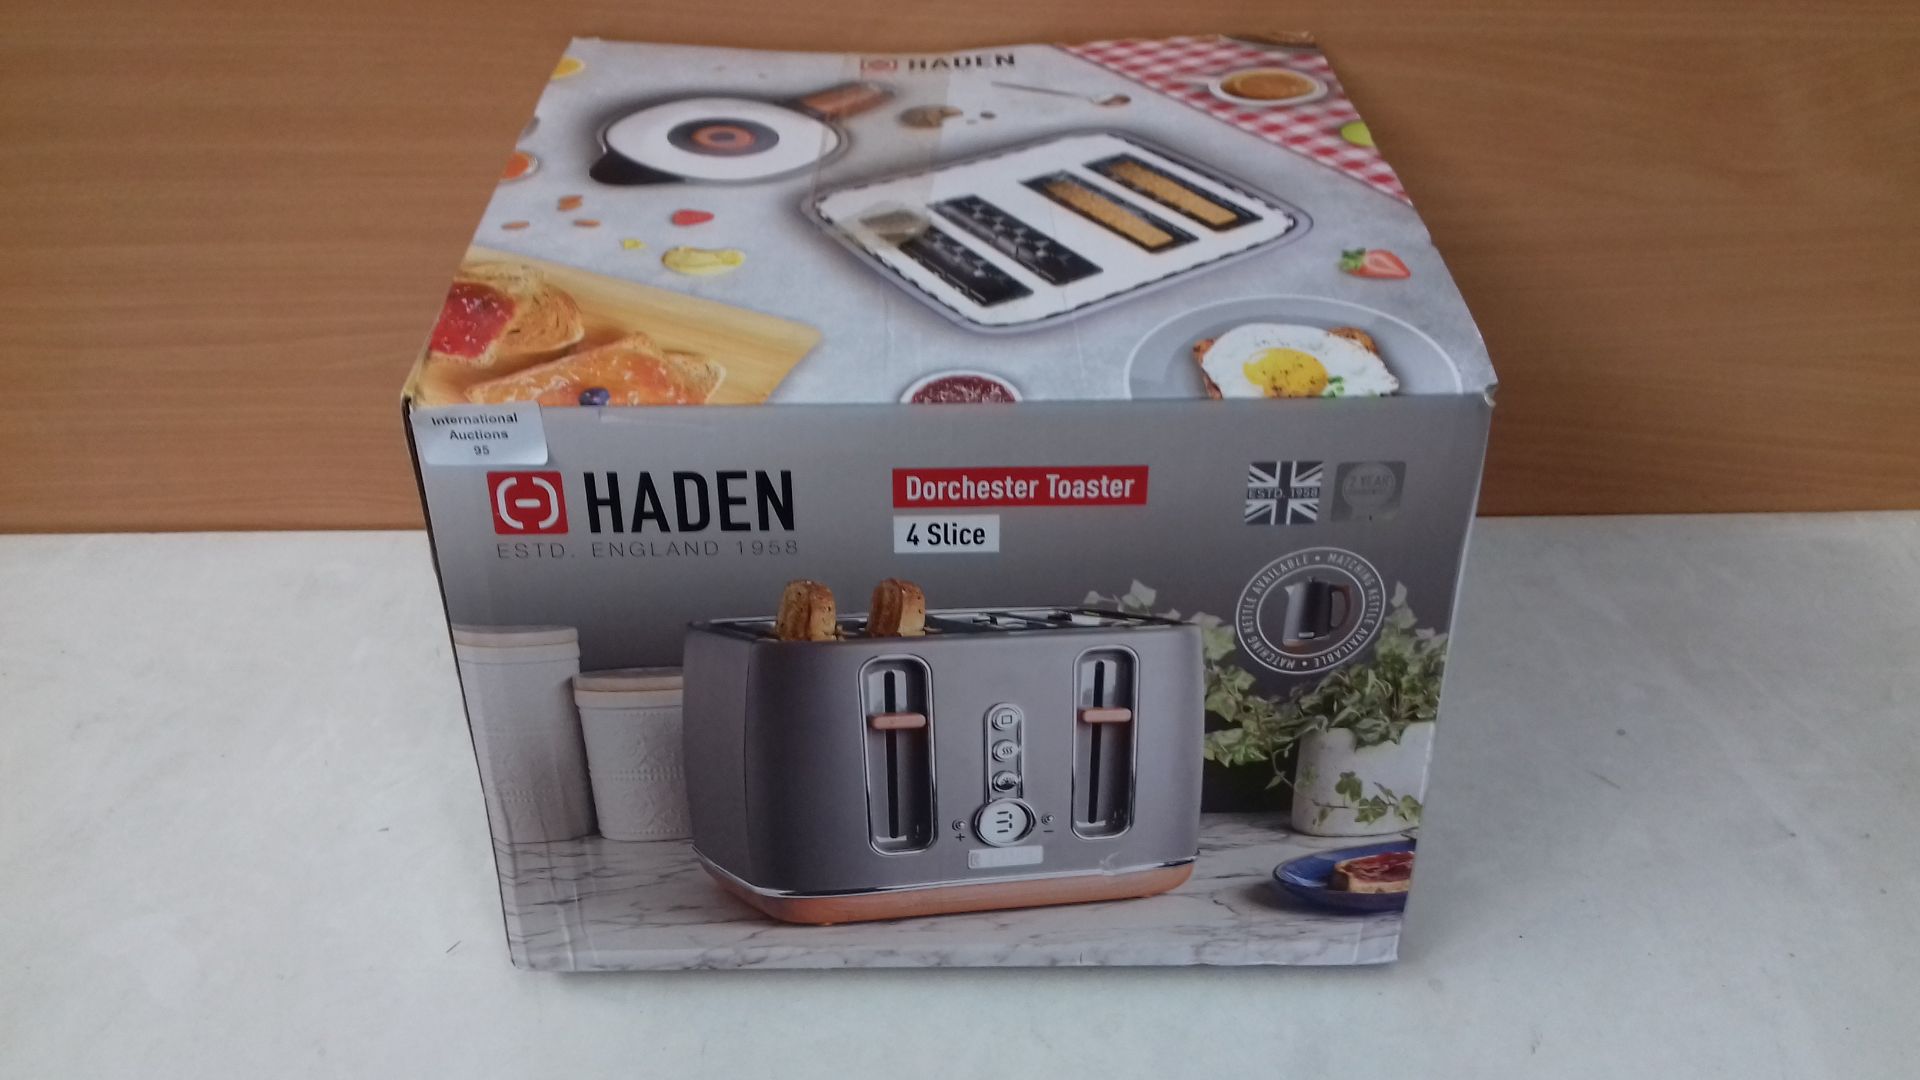 RRP £59.96 Haden Dorchester Toaster Modern LCD Display Digital - Image 2 of 2